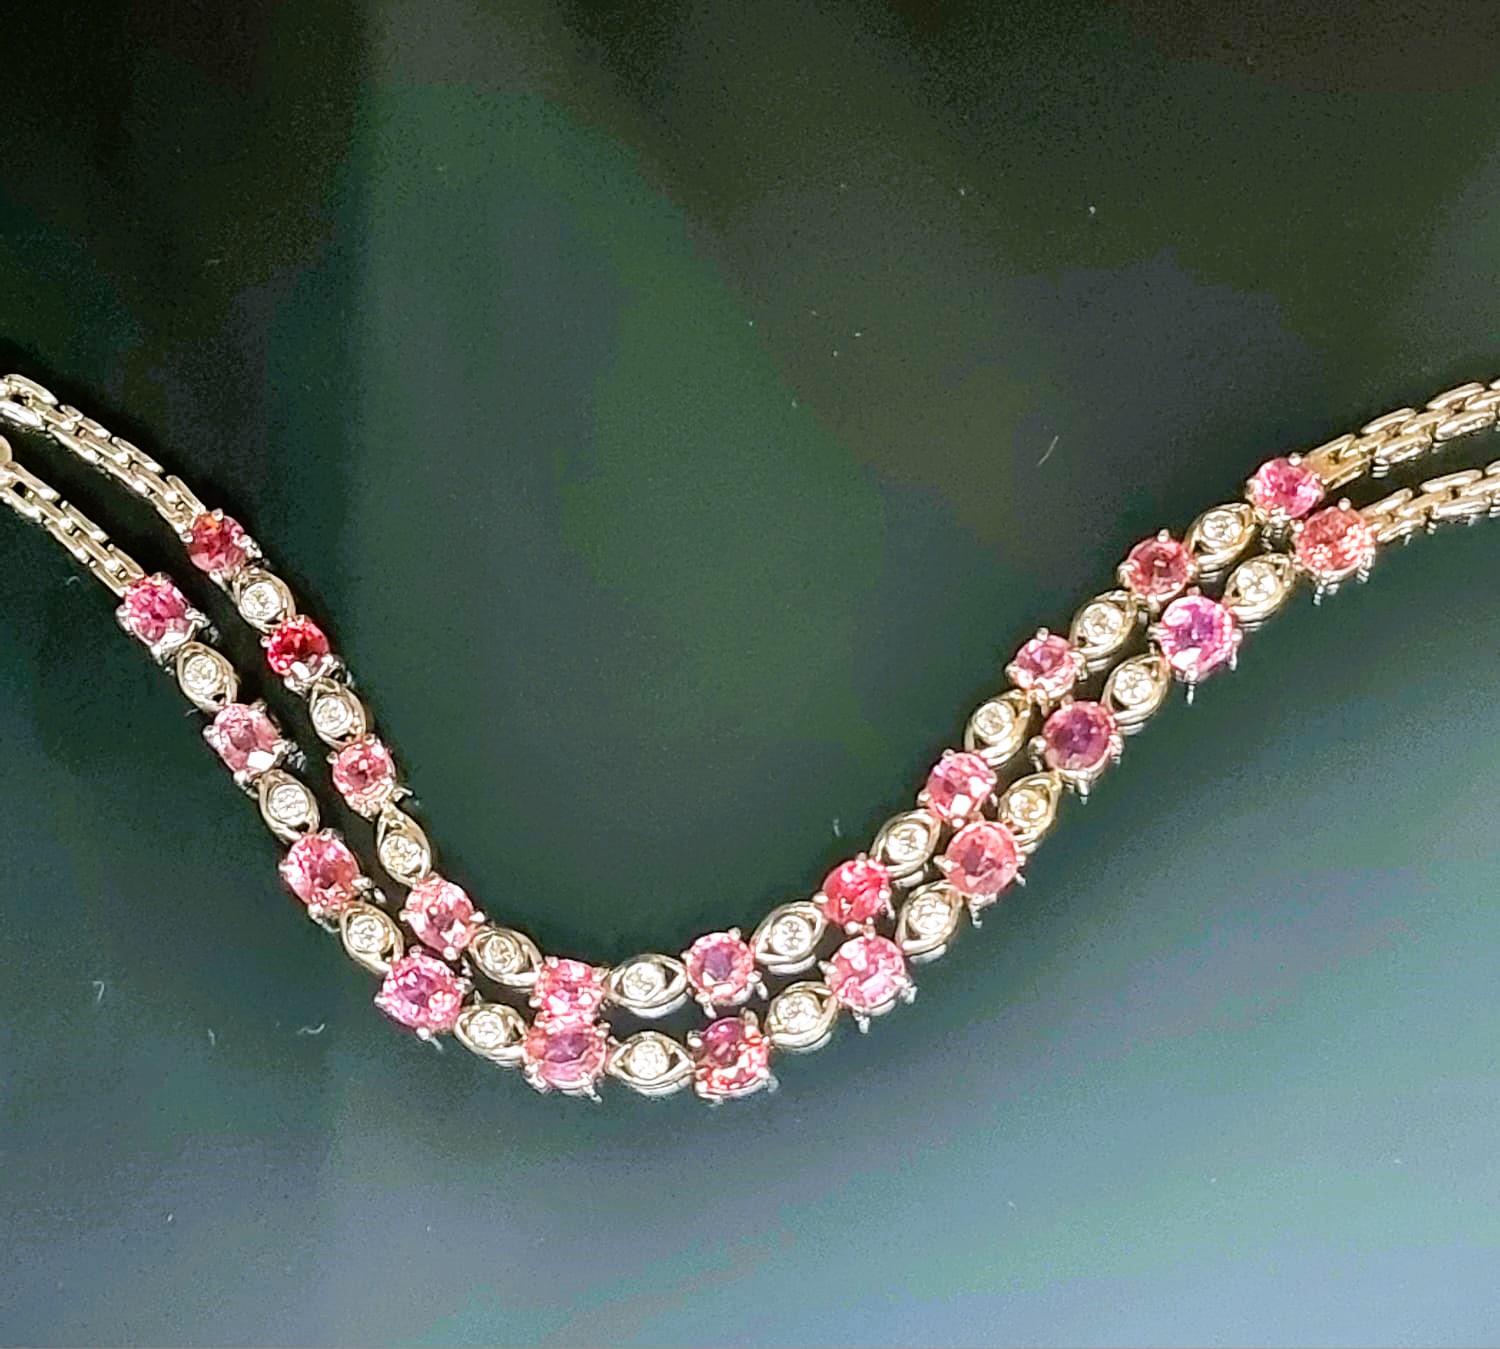 Indulge in the captivating charm of our 10 Stone Pink Tourmaline and Zircon Tennis Bracelet, where each pink tourmaline gemstone weighs an impressive 0.75ct featuring a total of 7.5ct of richly hued pink tourmalines, each one prong-set to